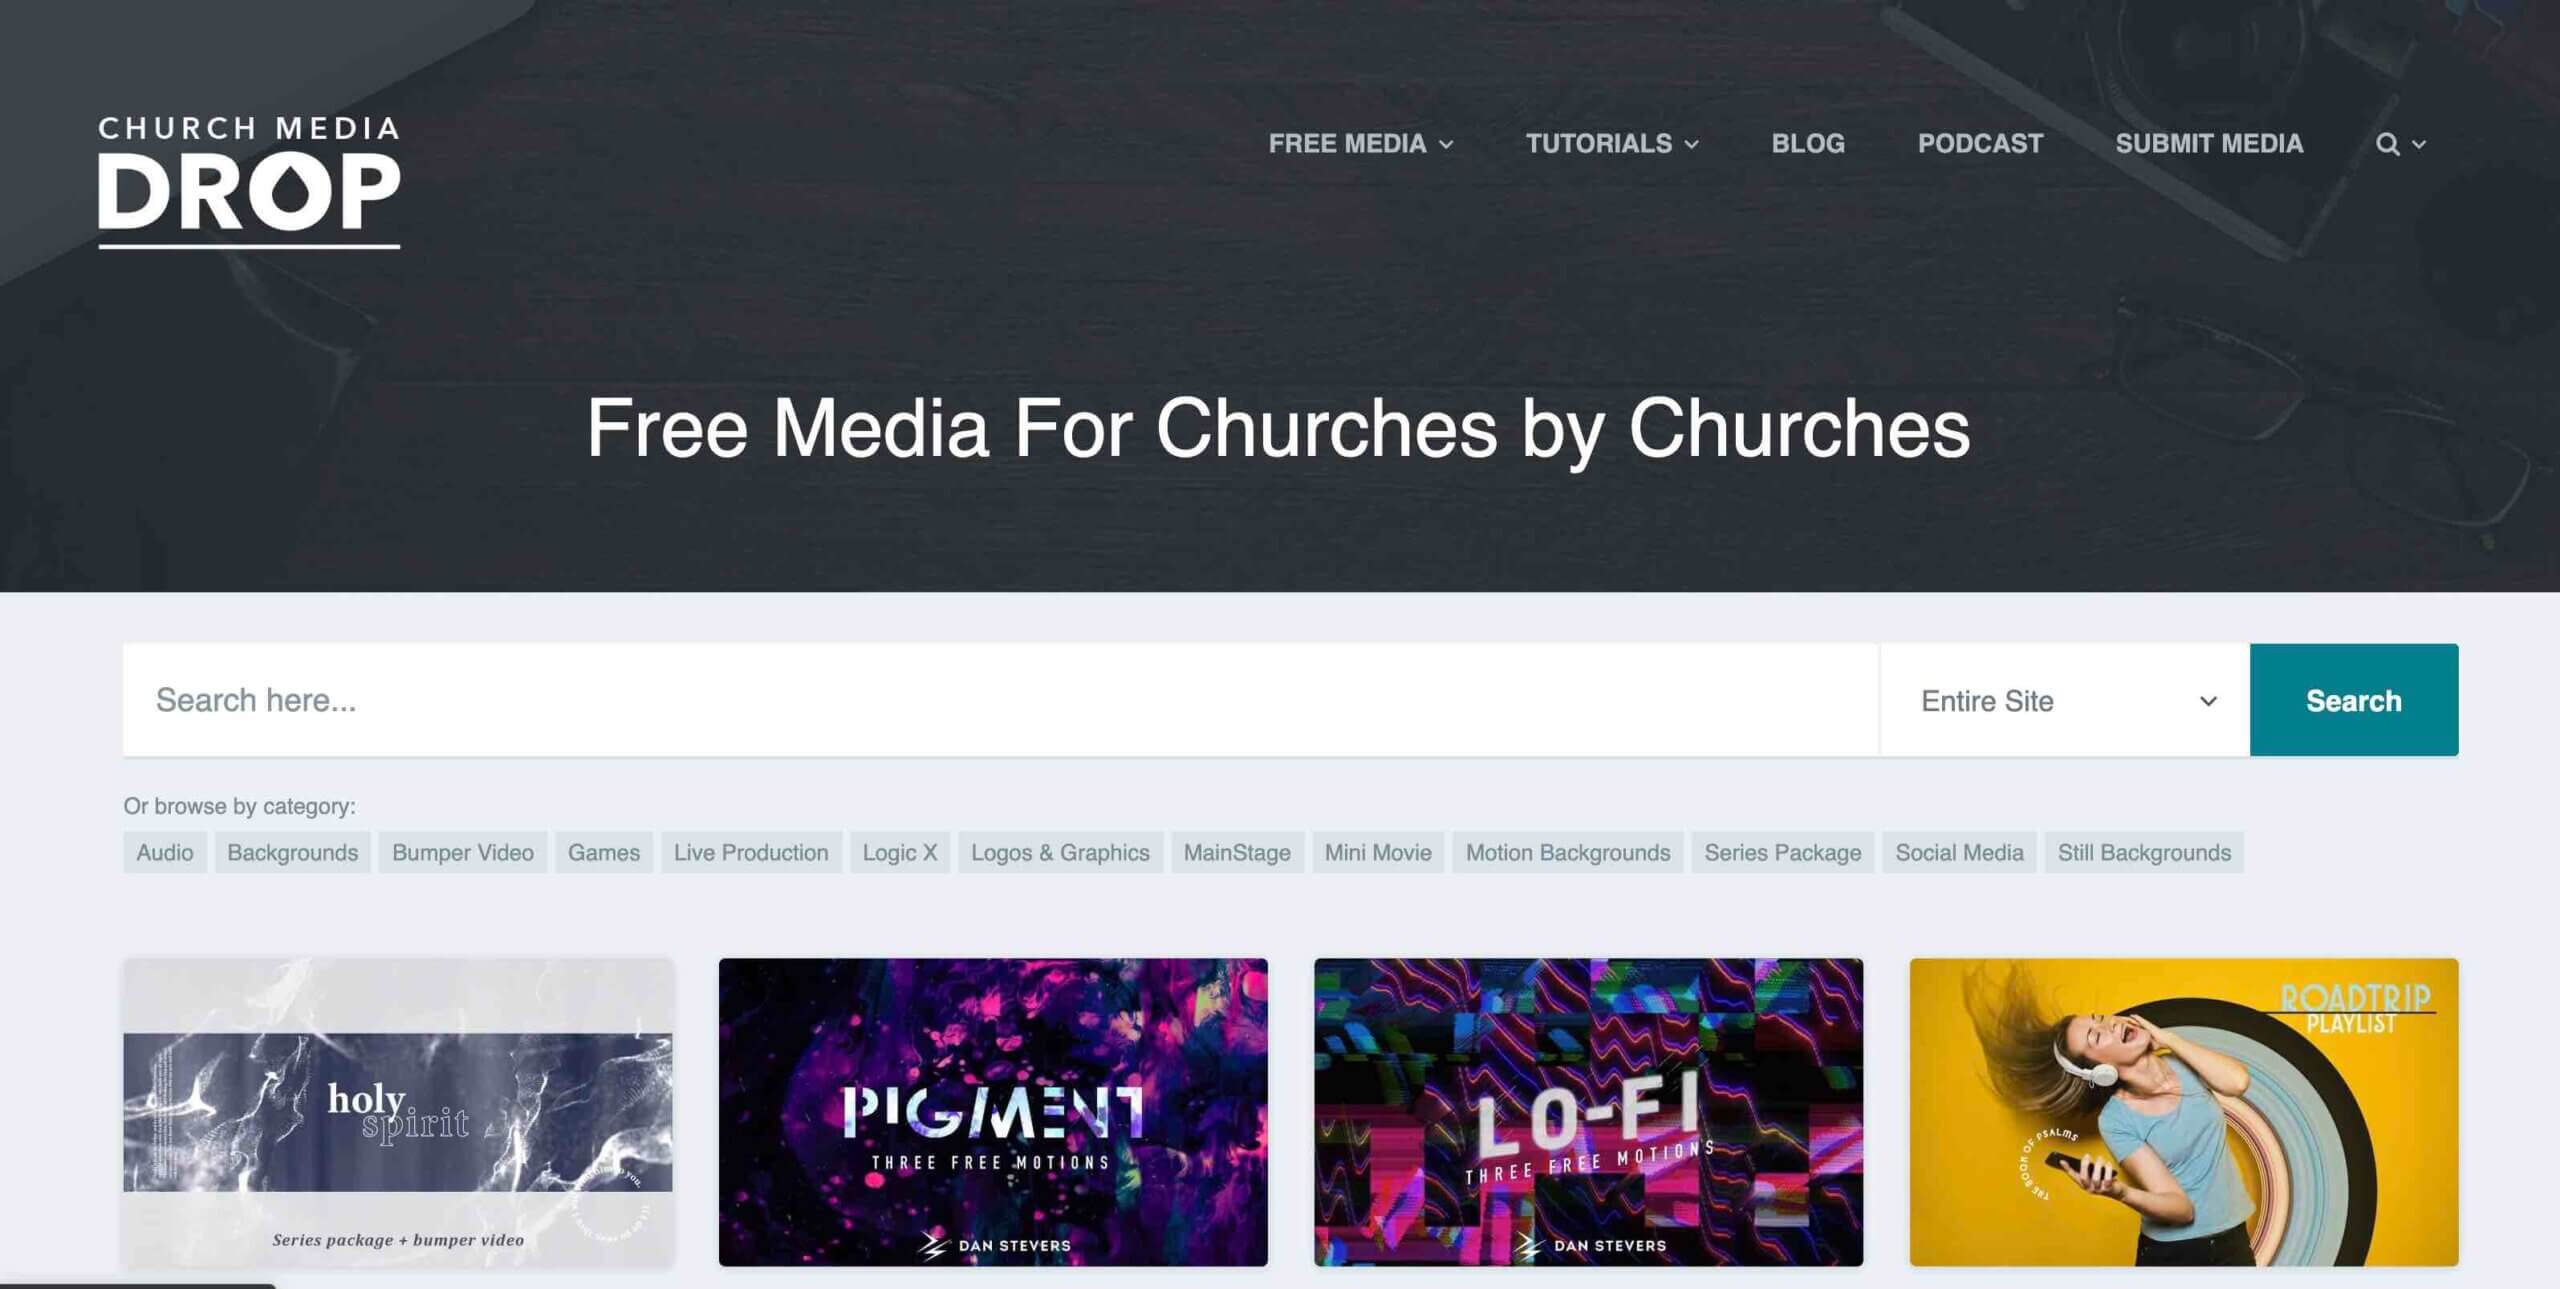 Church Media Drop free media for churches including motion backgrounds